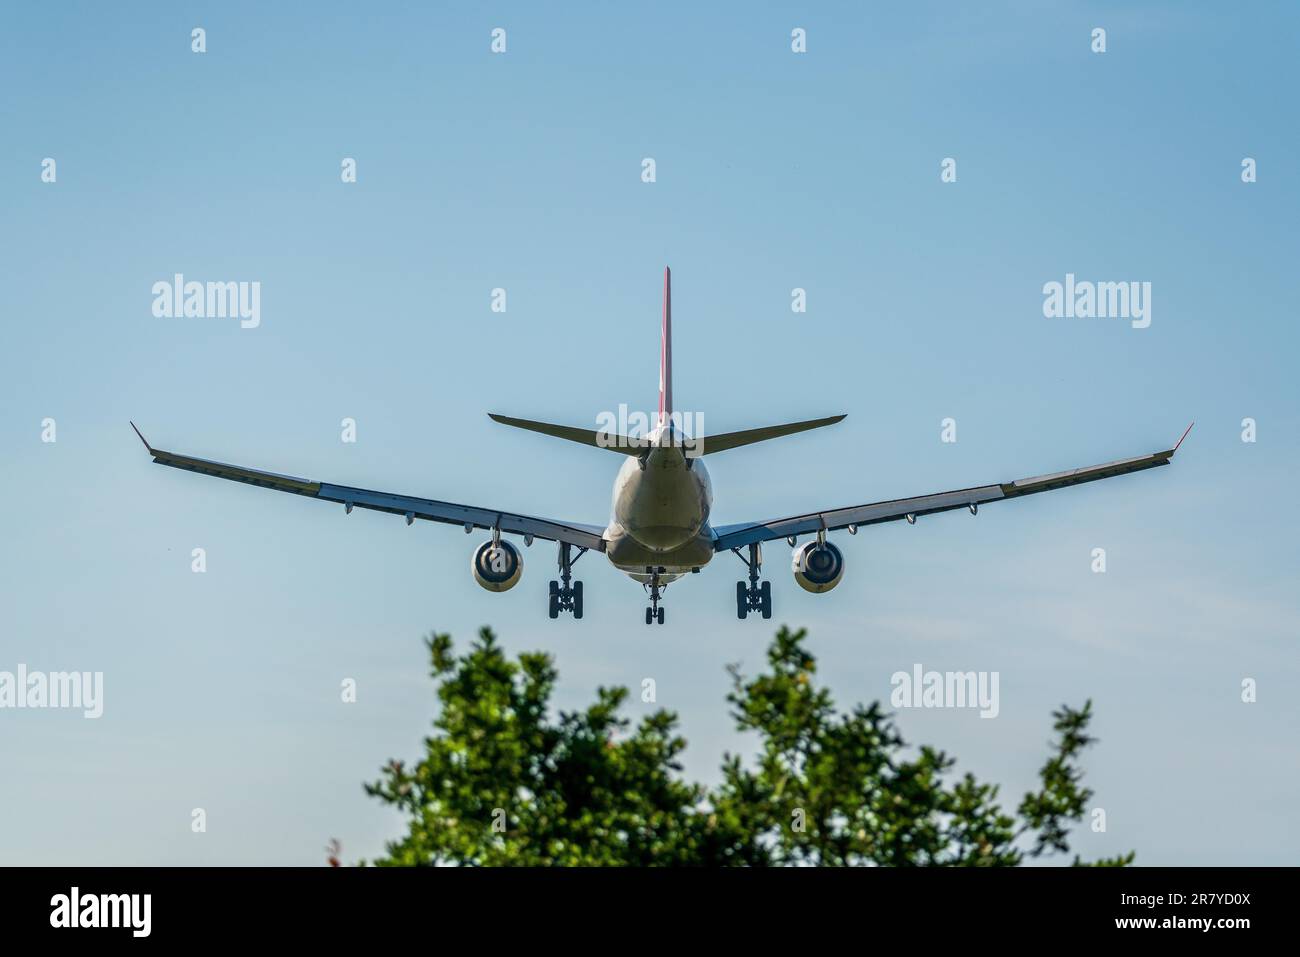 Airplane prepares for landing with extended landing gear Stock Photo